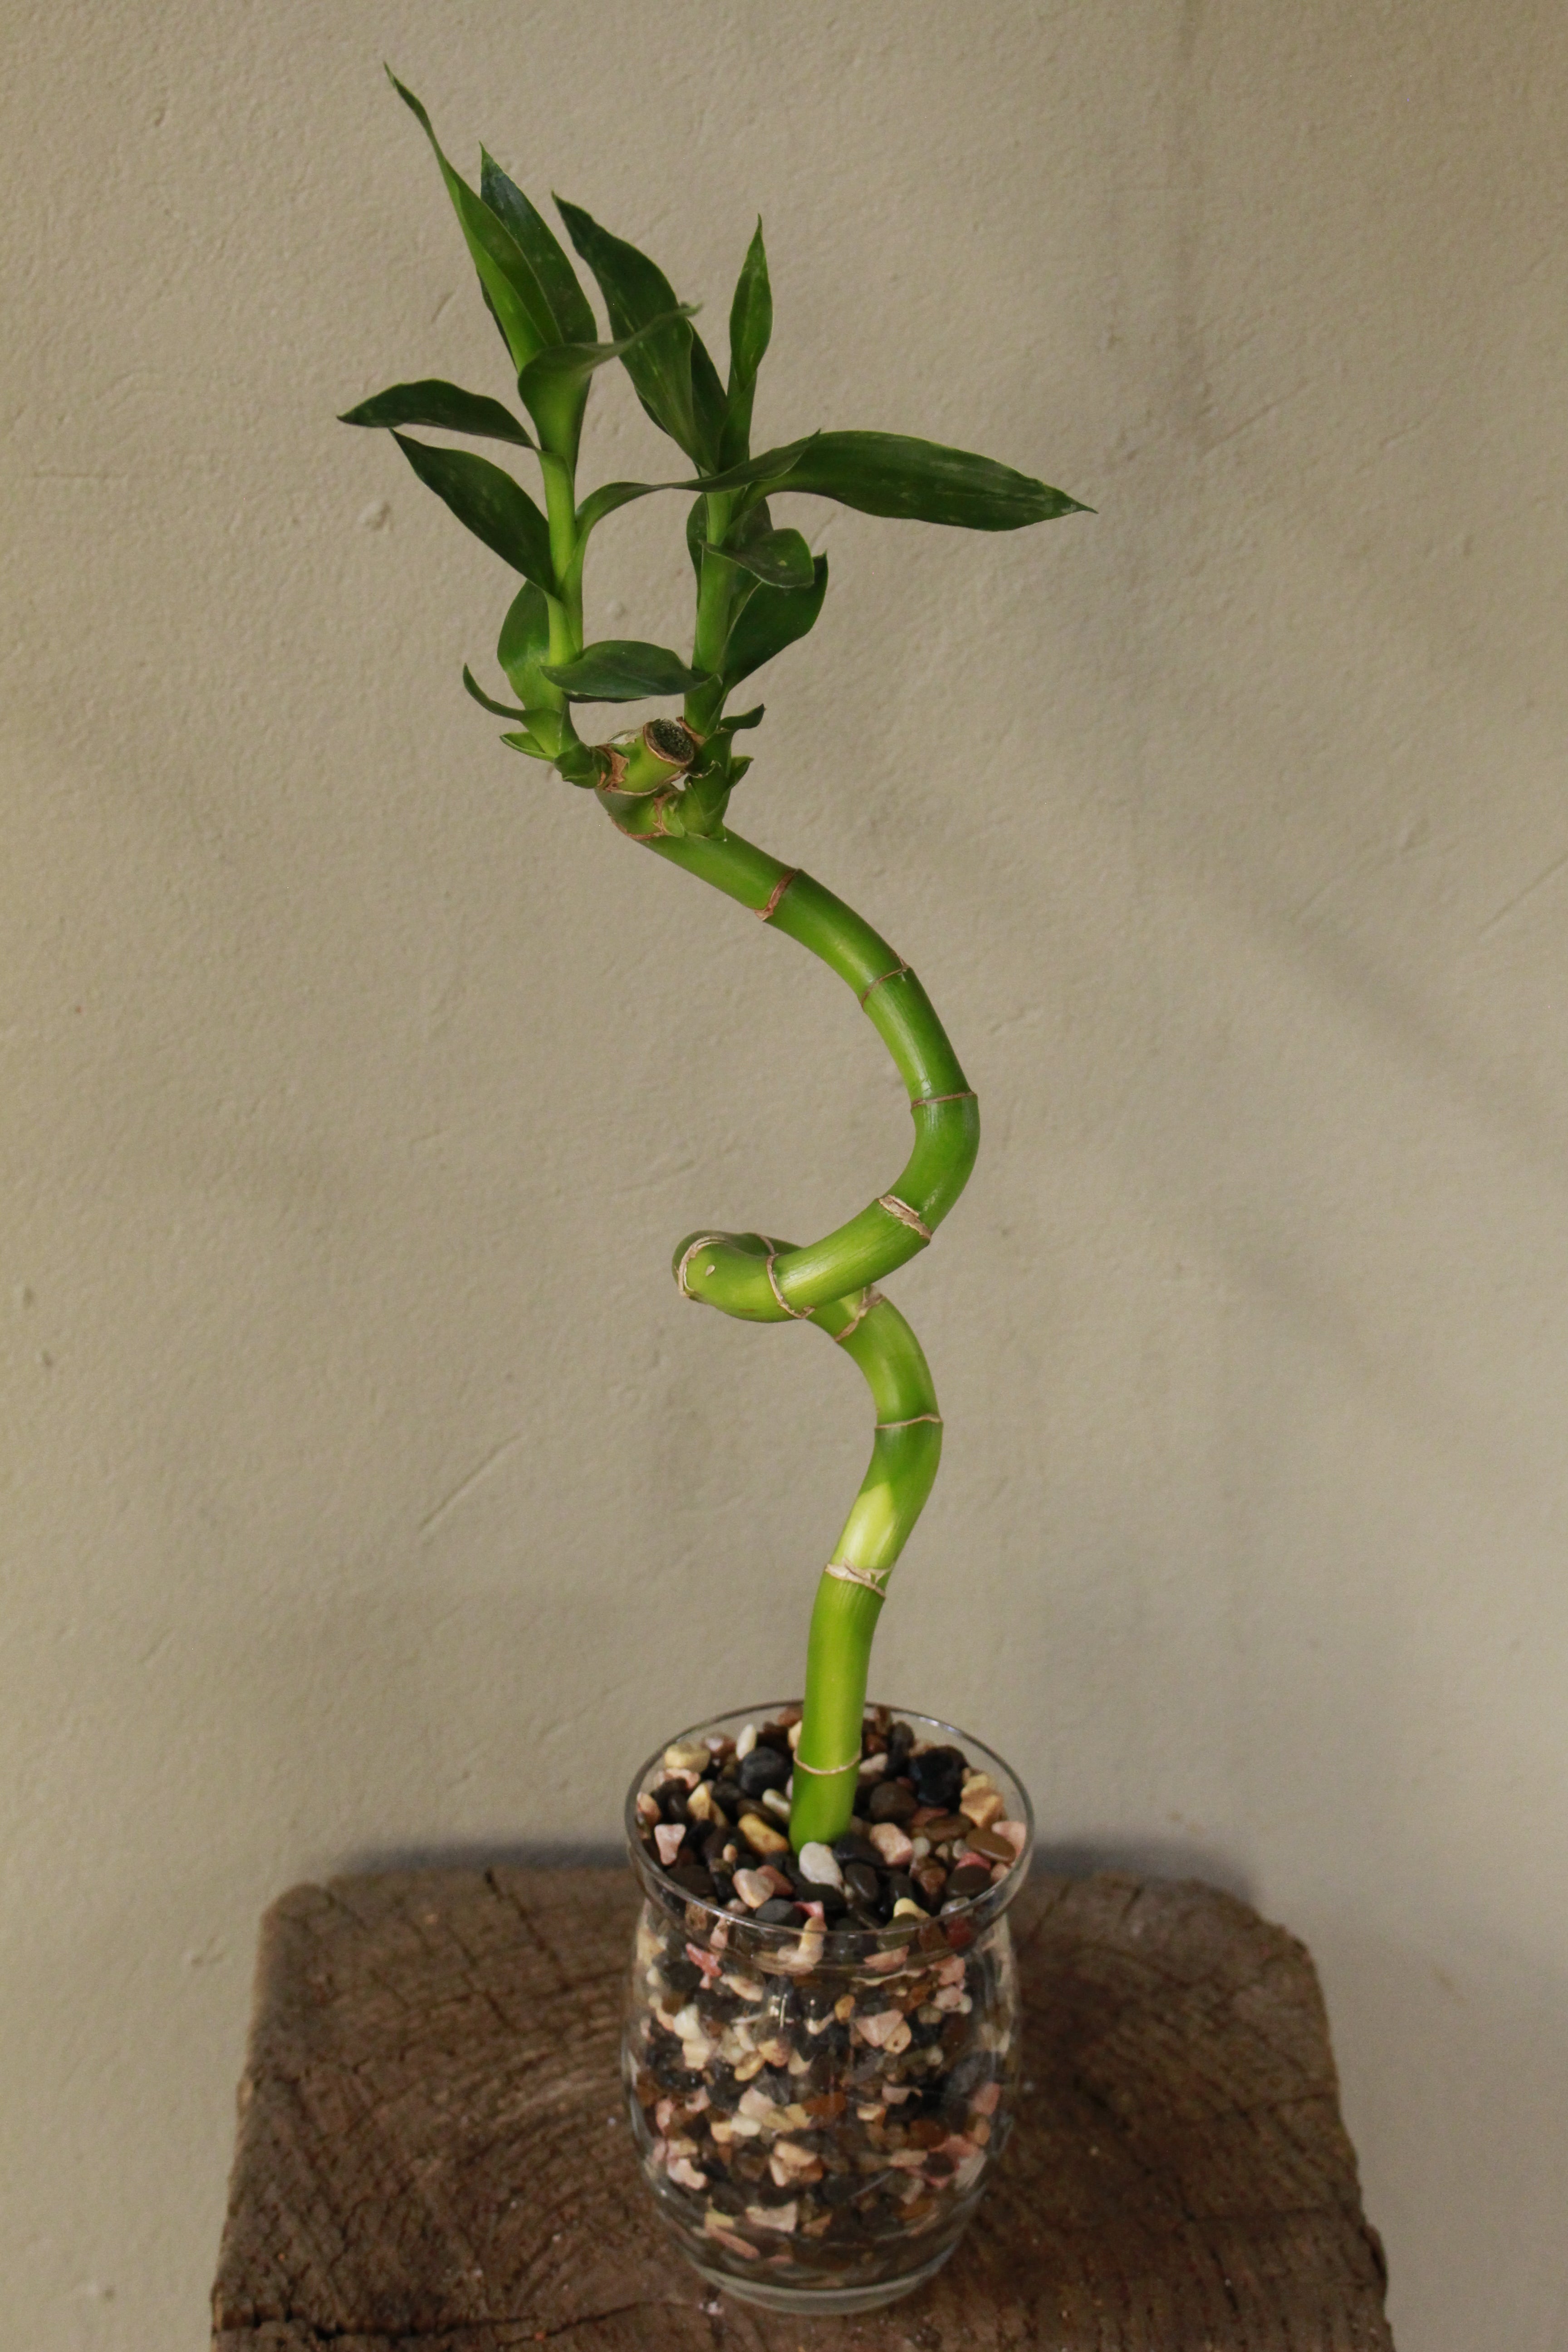 Lucky Bamboo Curled - 1 stem - Planted in glass jar with gravel